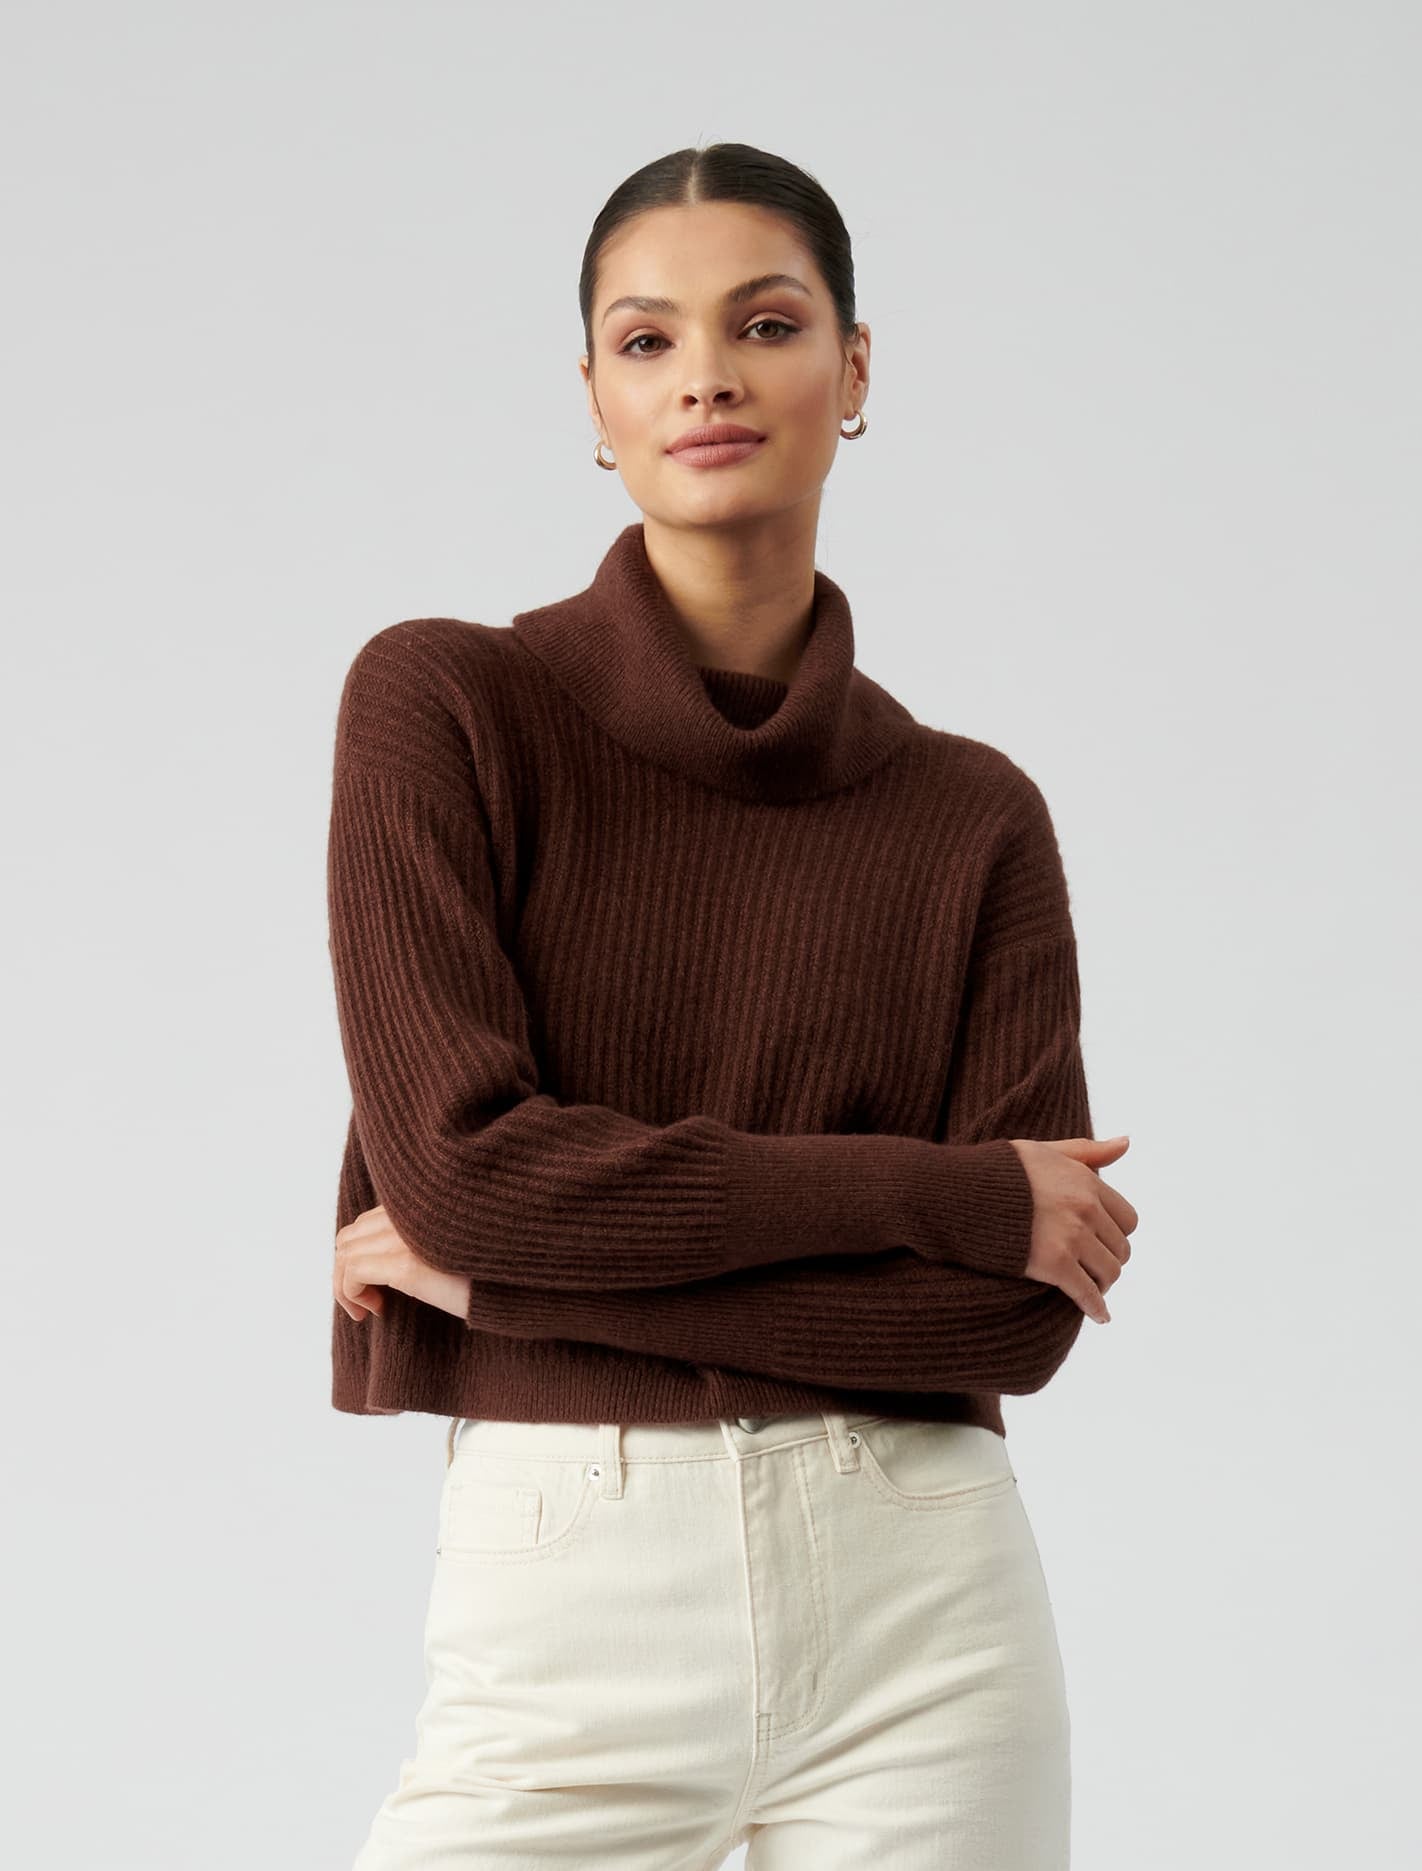 Forever New Women's Willow Roll Neck Knit Jumper in Chocolate, Size Medium Acrylic/Polyester/Polyamide